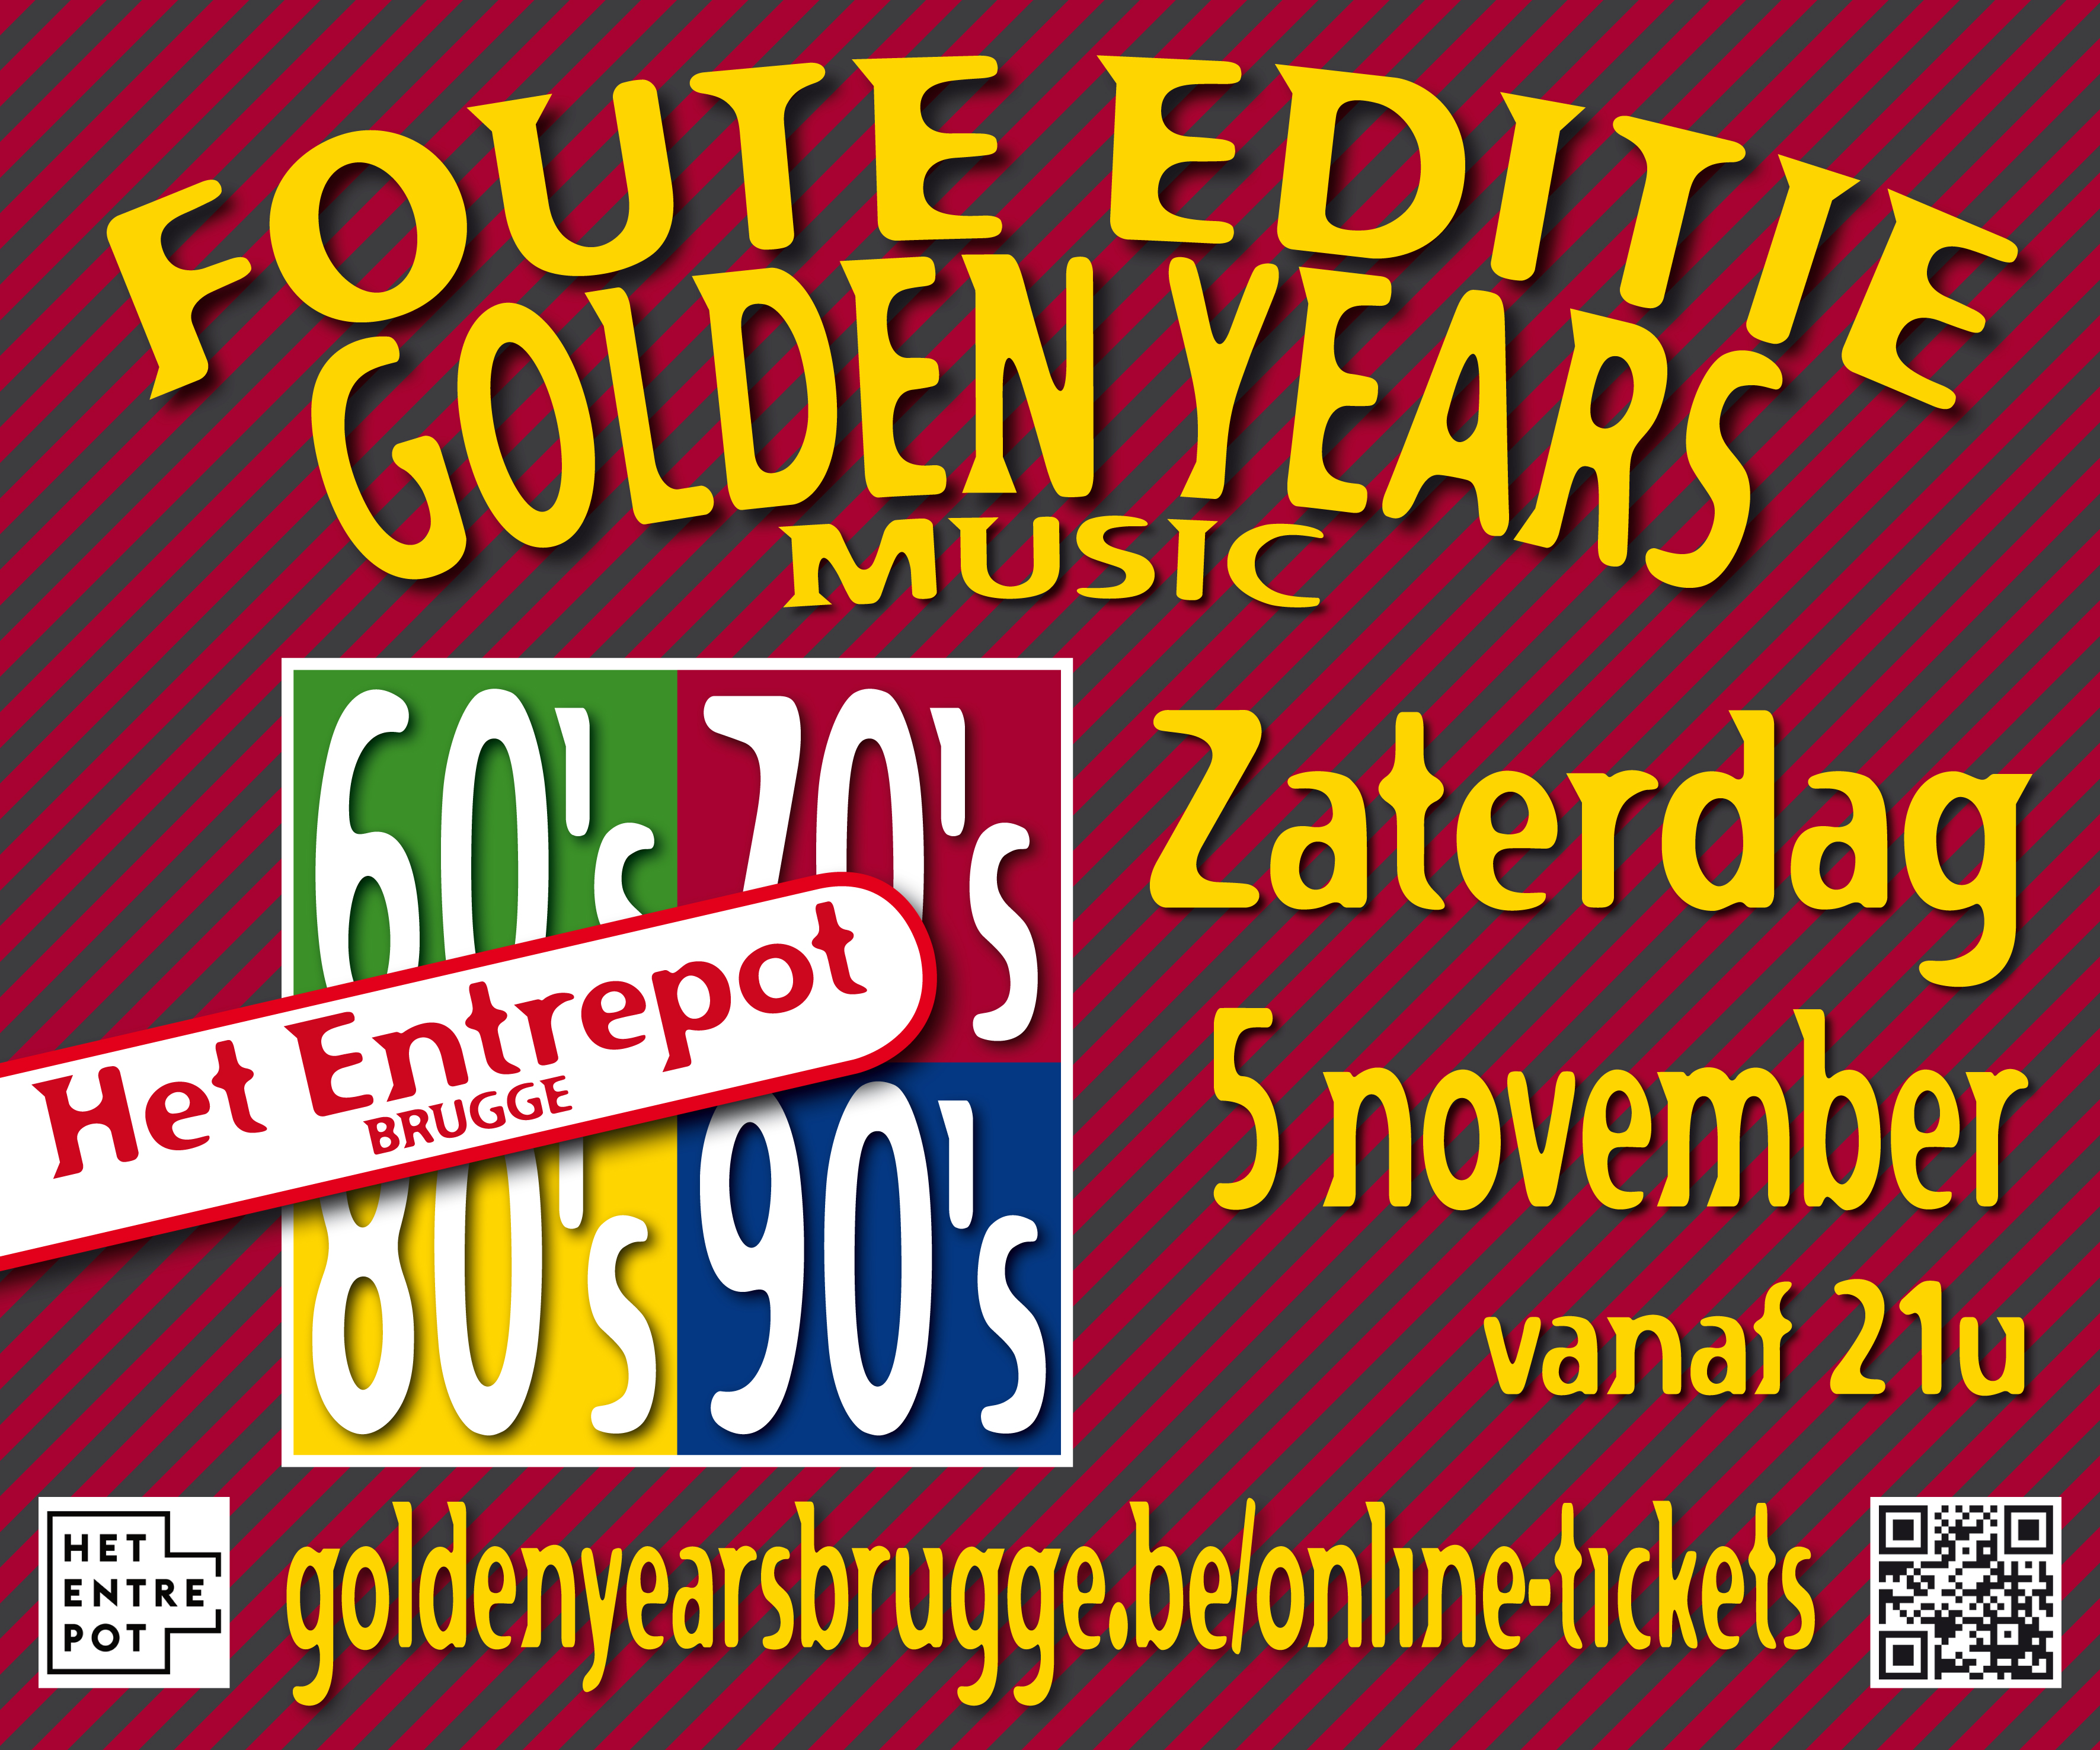 Foute-editie-golden-years-music